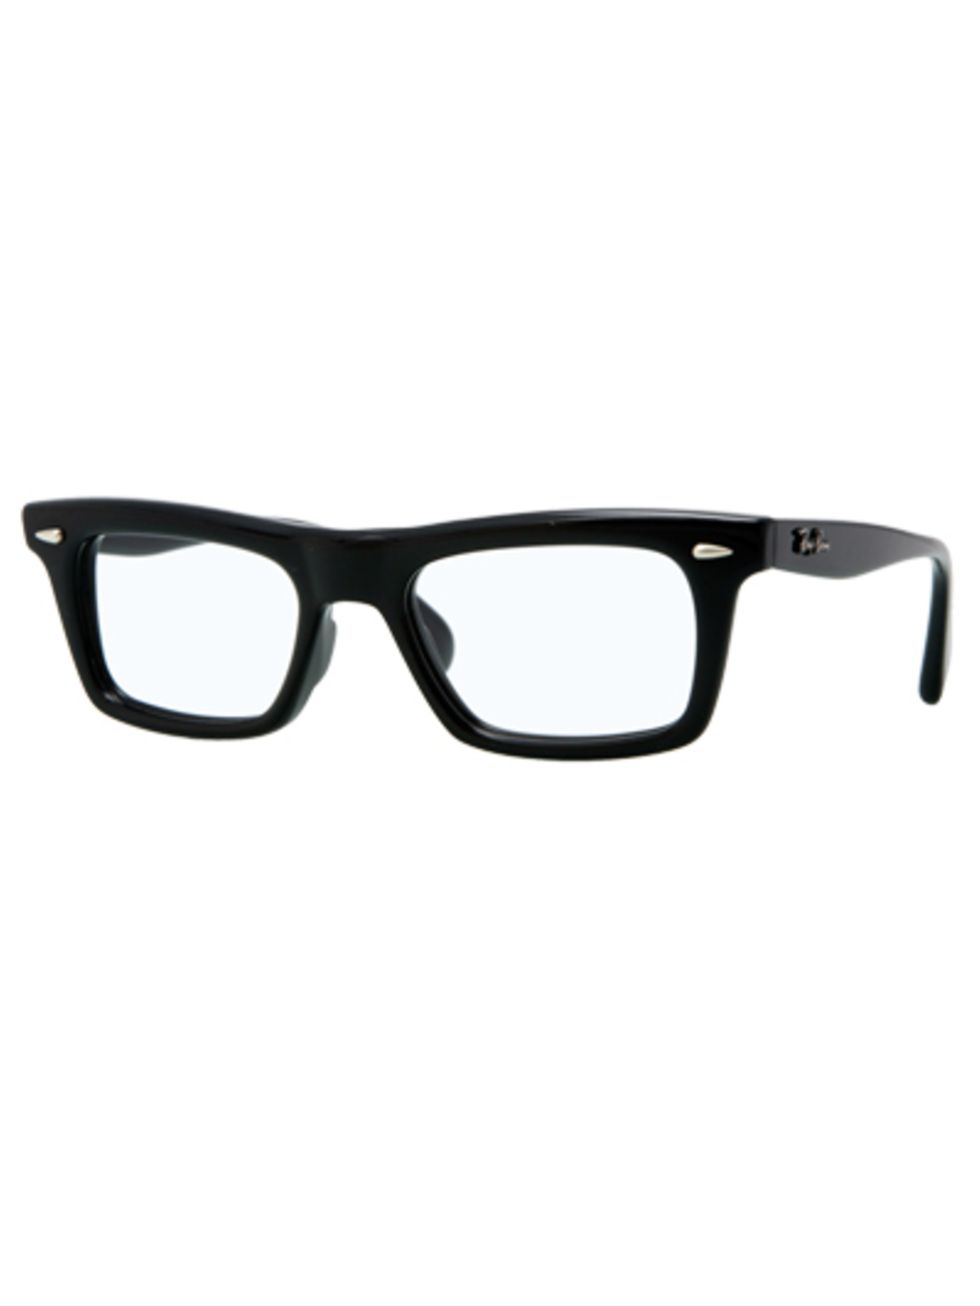 Eyewear, Glasses, Vision care, Product, Brown, Photograph, Glass, Personal protective equipment, Line, Light, 